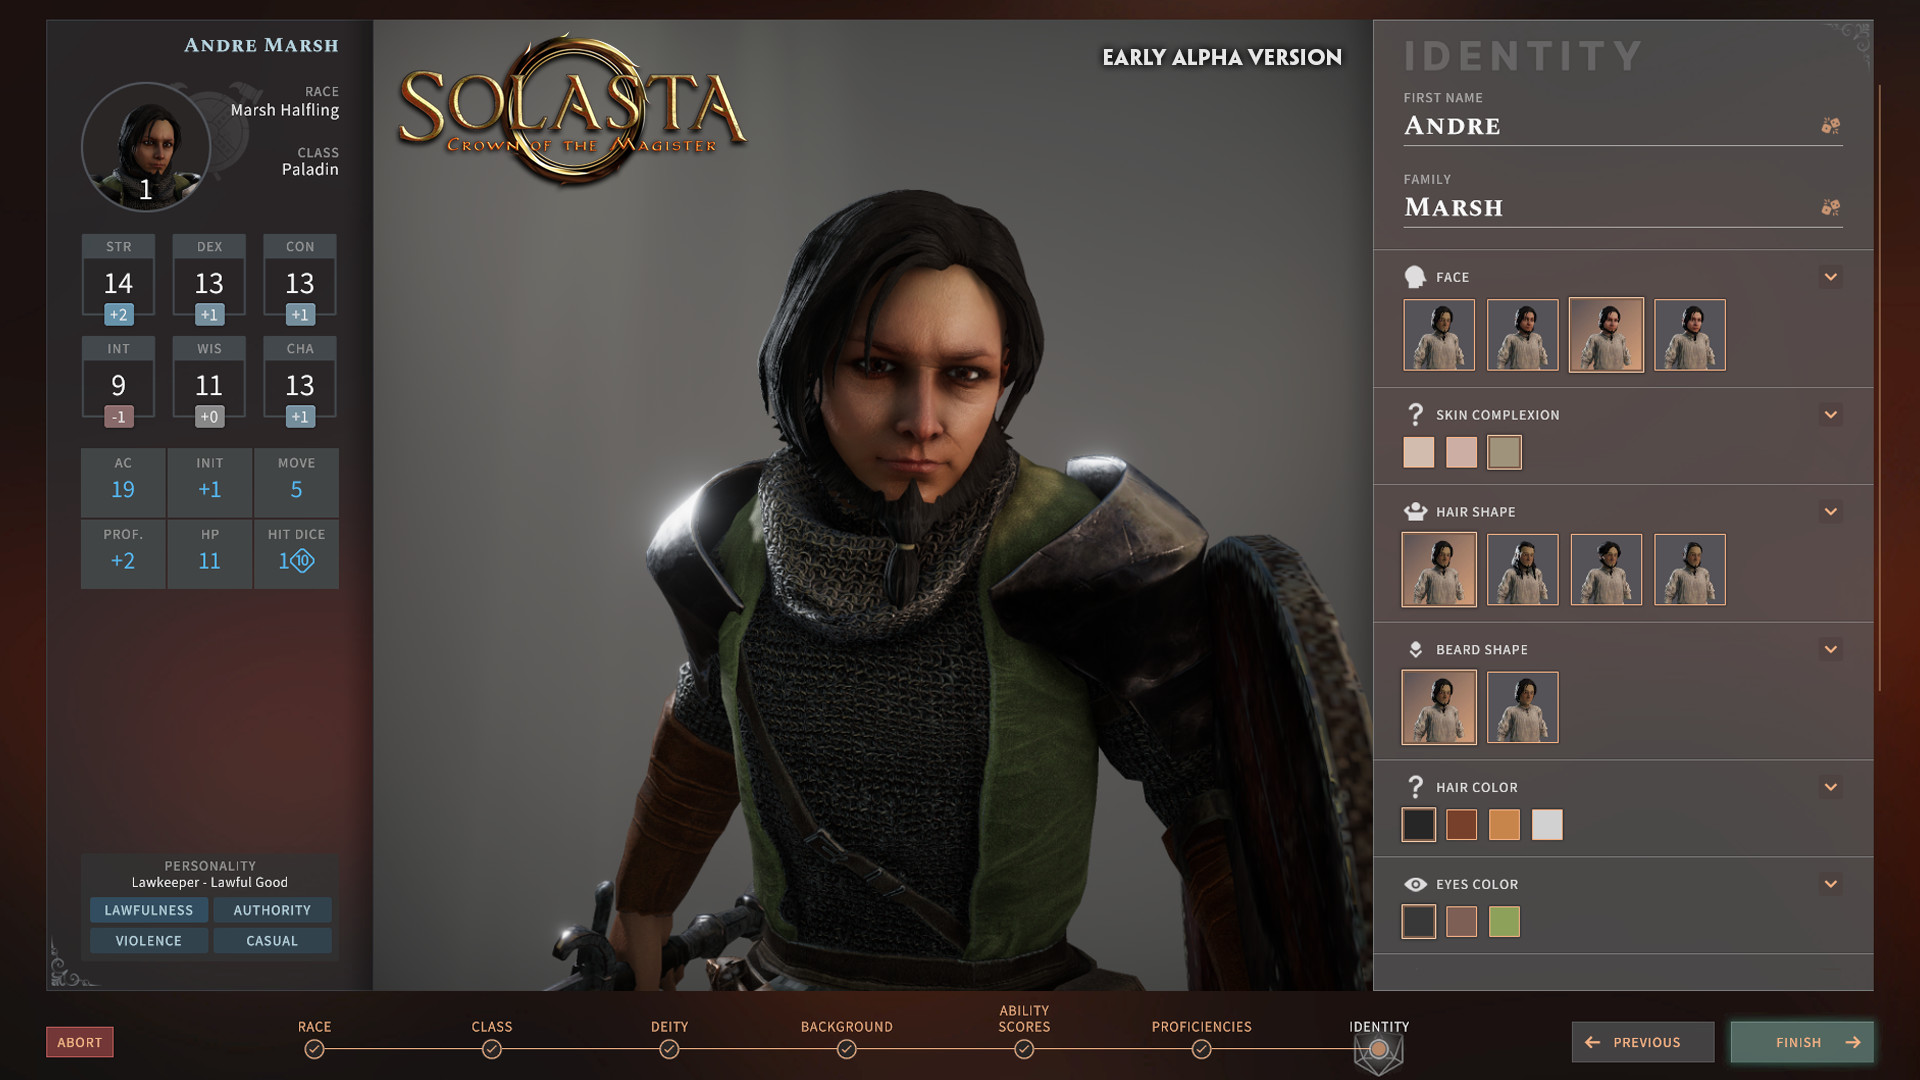 Solasta: Crown of the Magister Free Download